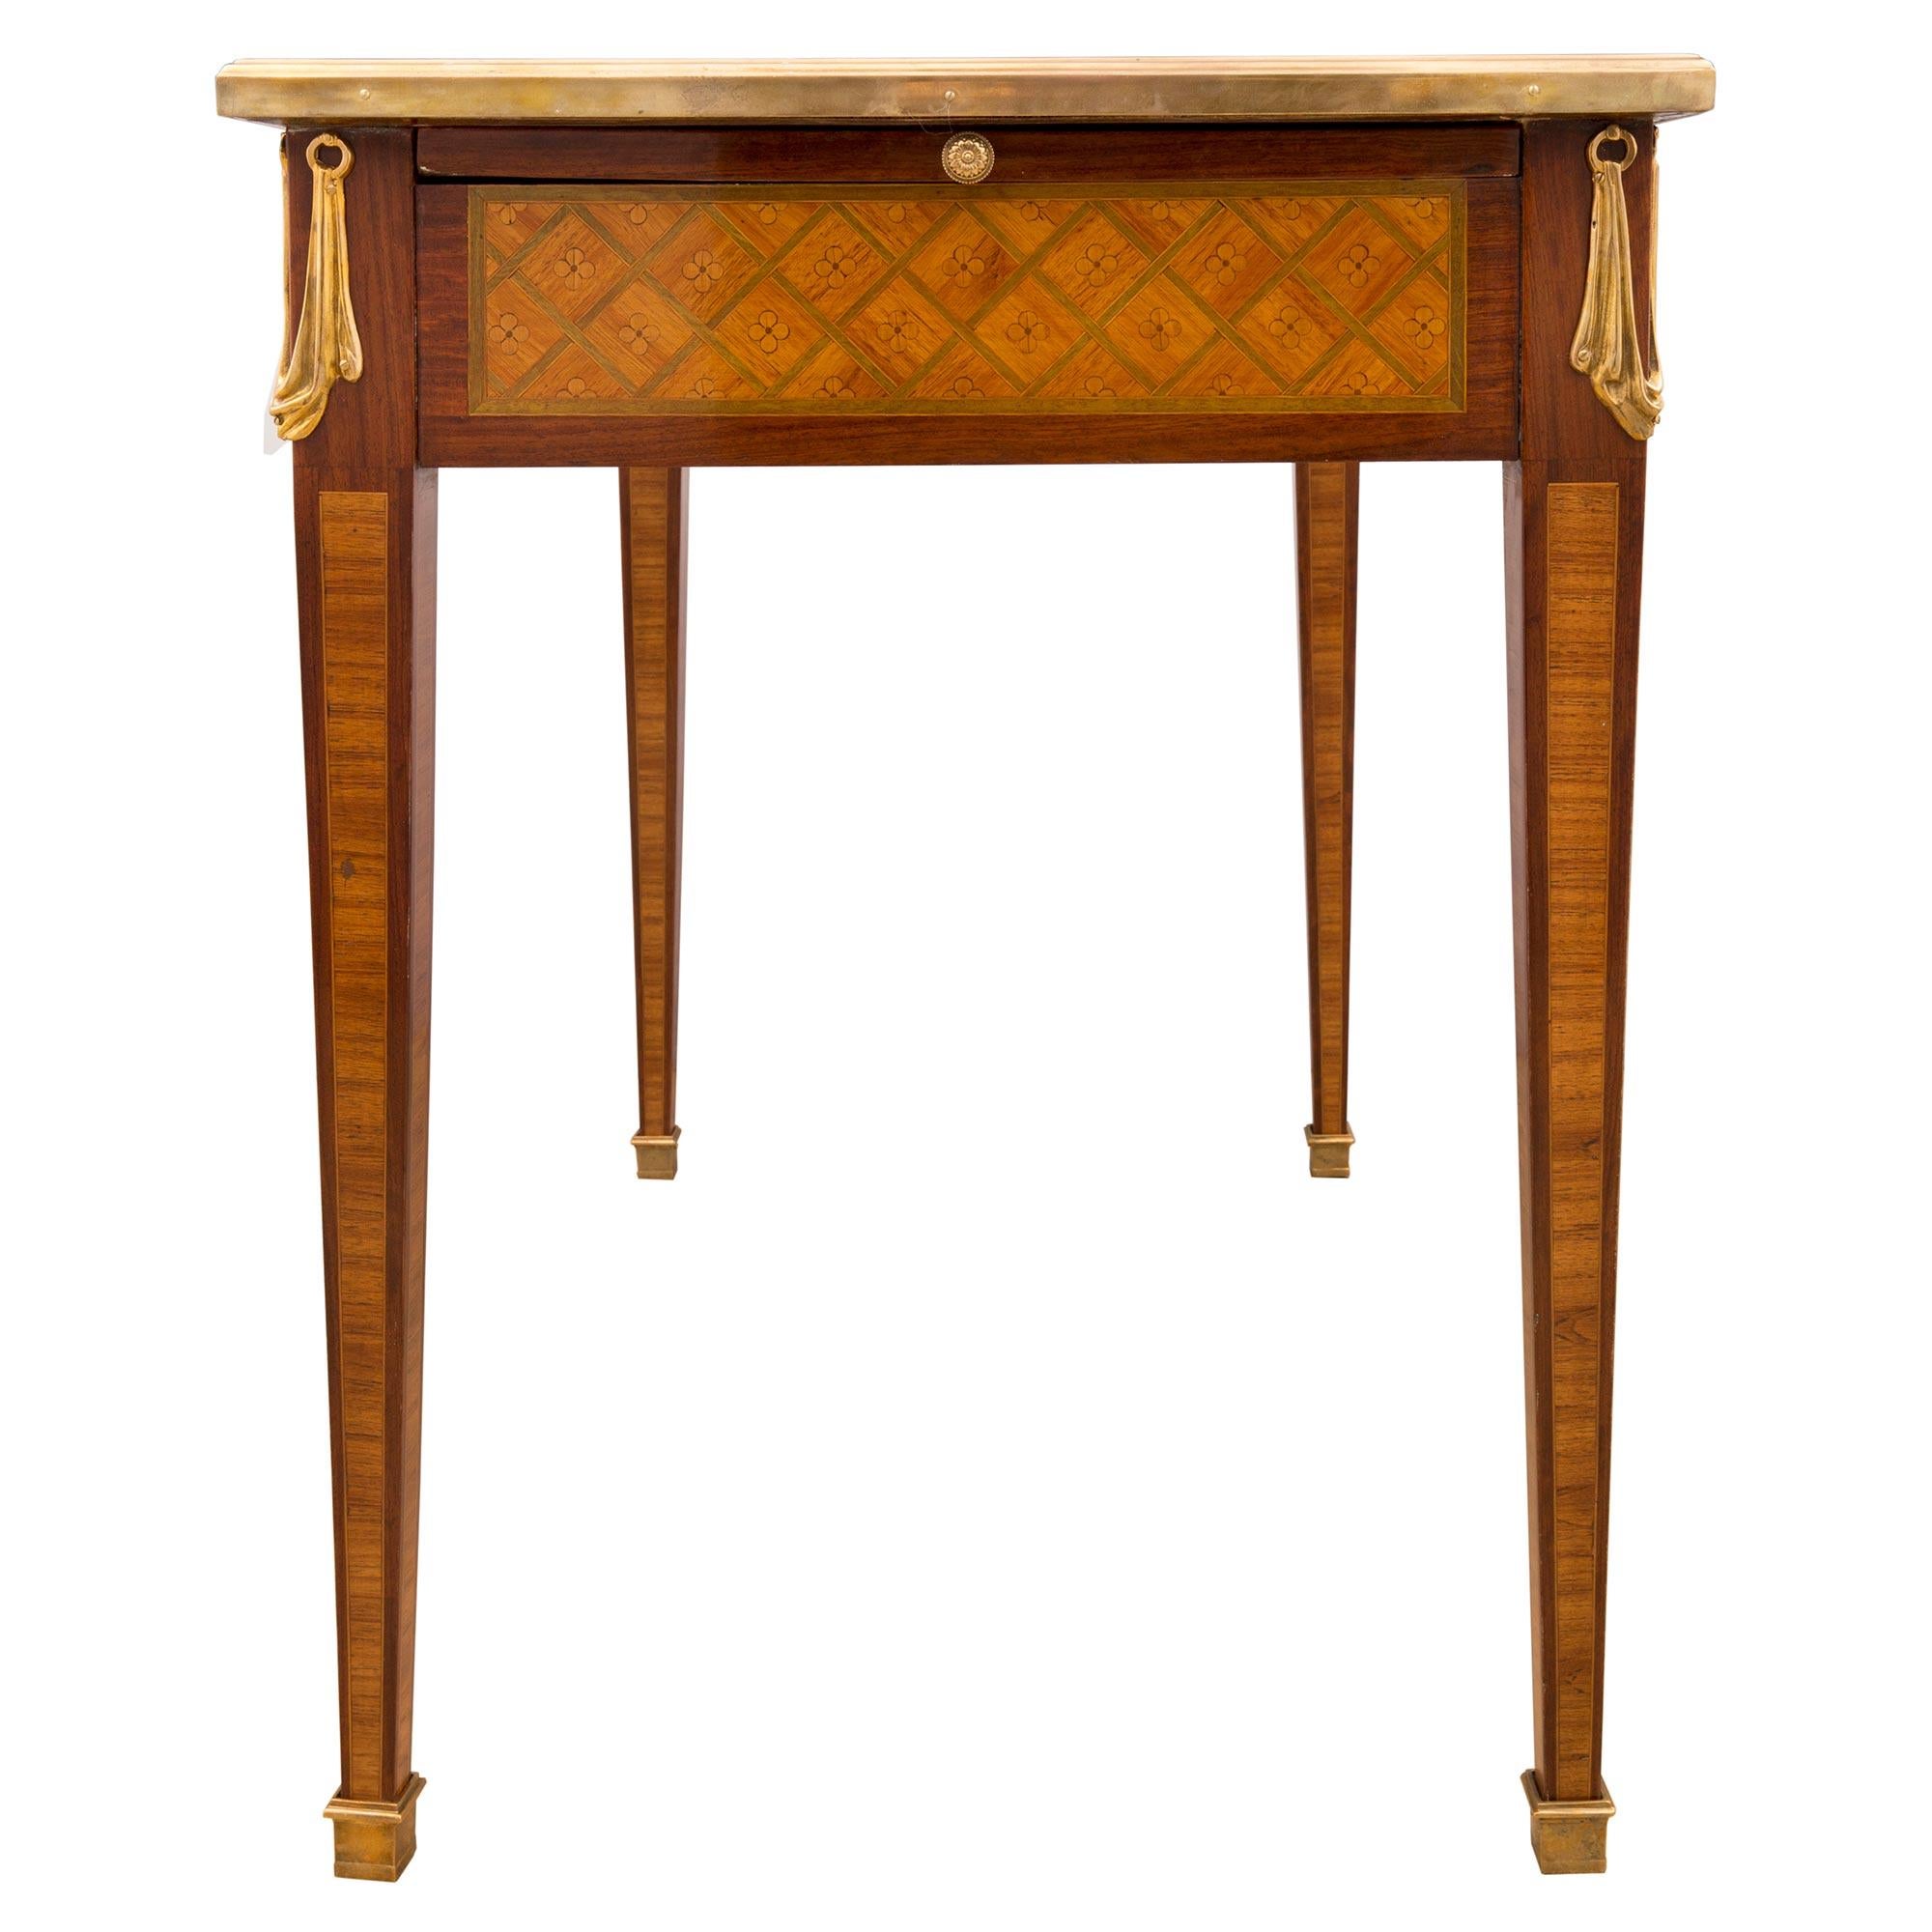 French Mid-19th Century Louis XVI Style Tulipwood, Kingwood and Charmwood Desk For Sale 2